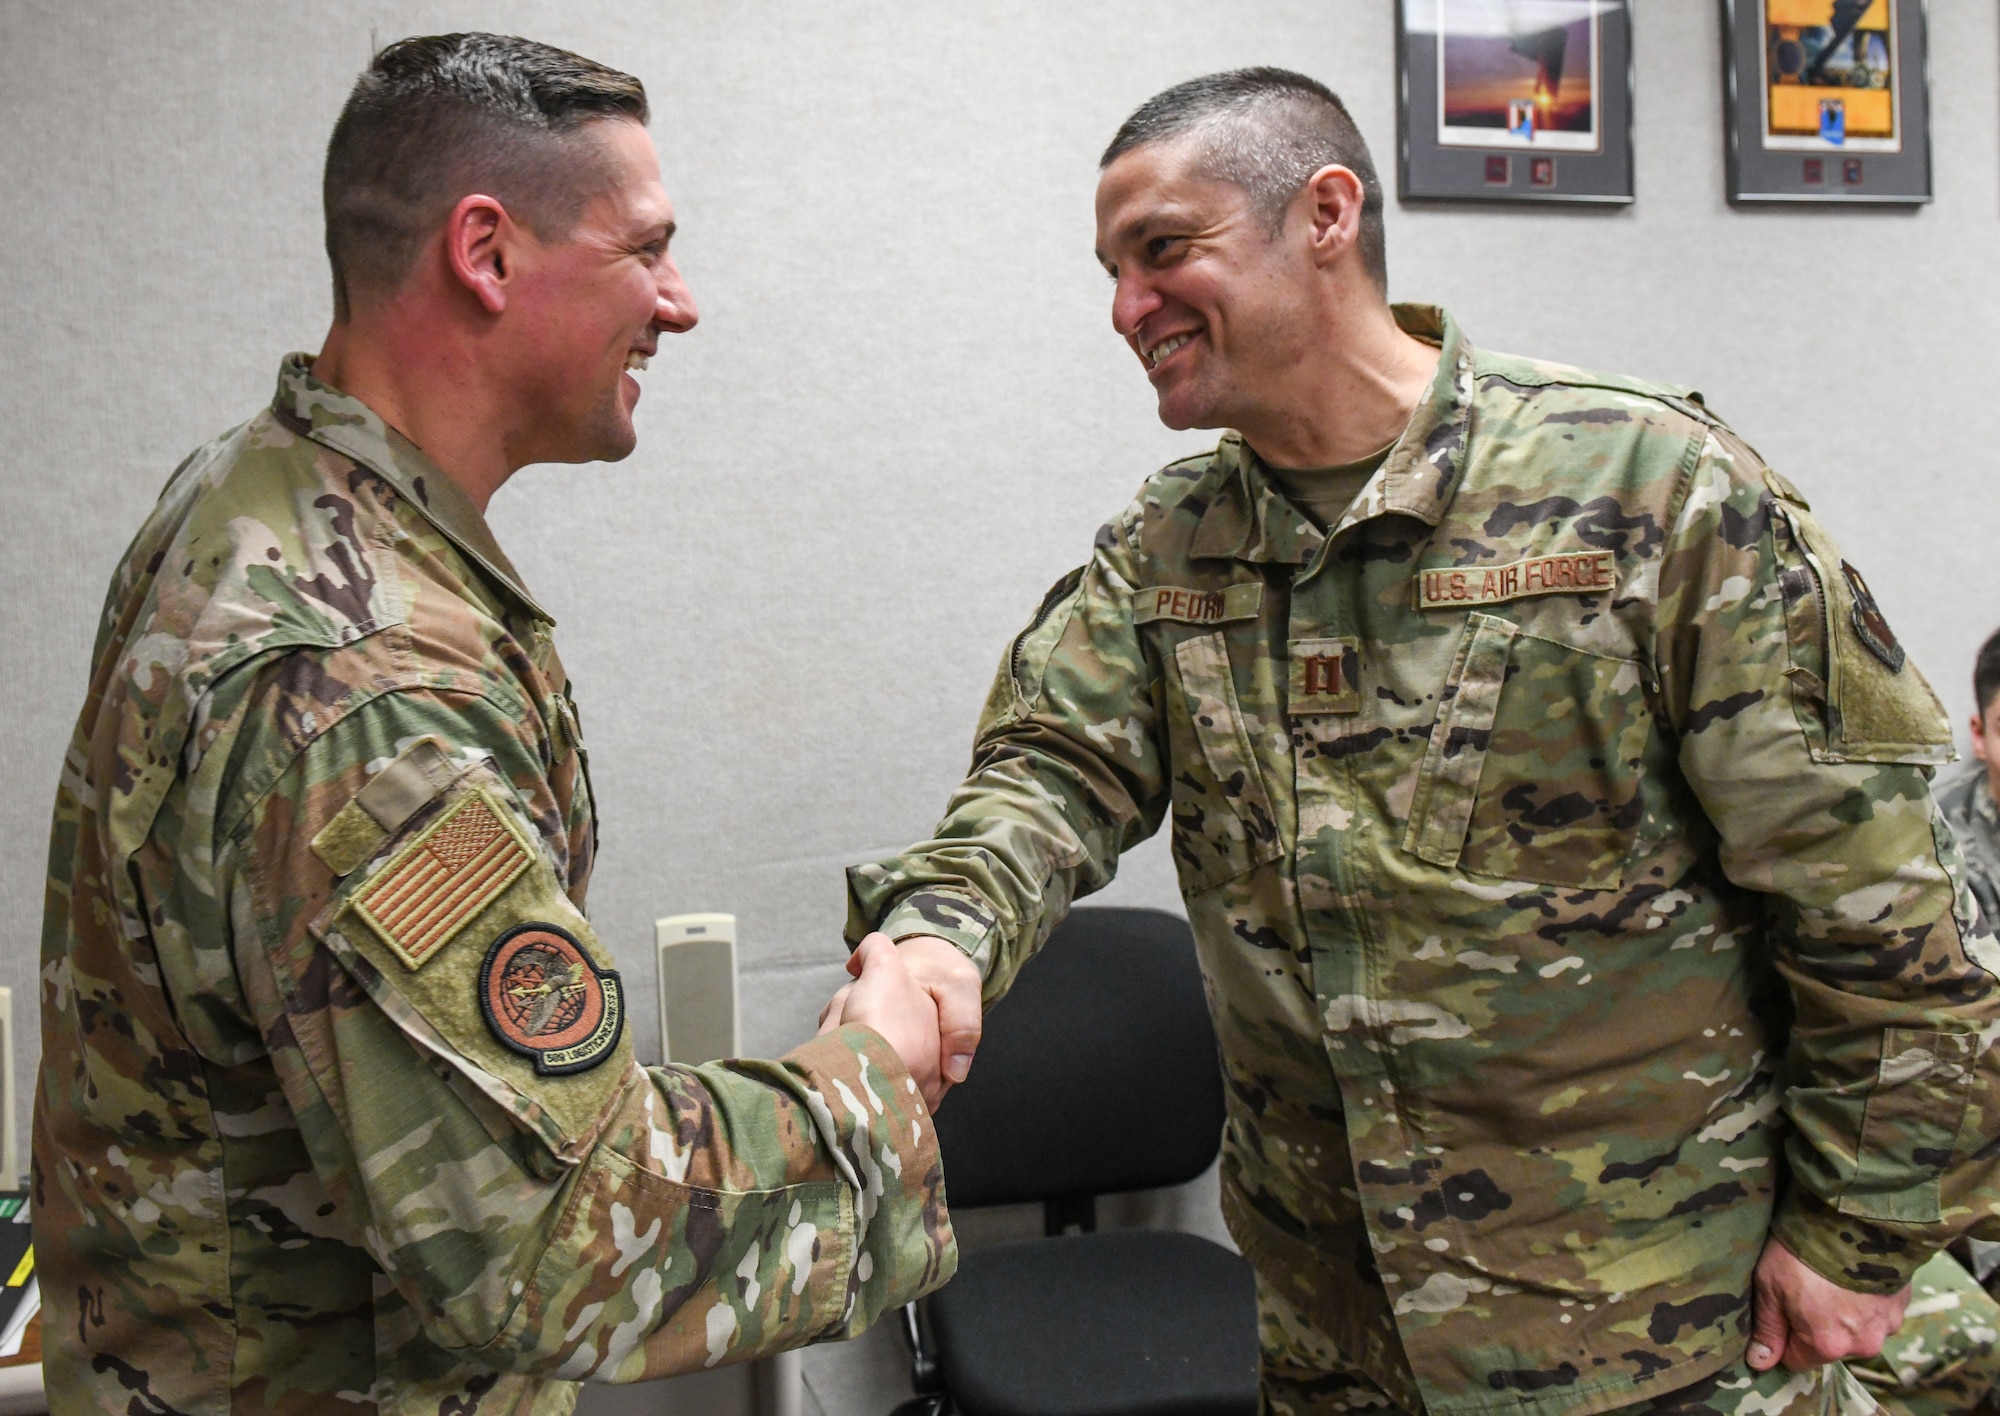 2nd Lt. Casey Bunt, left, 509th Logistics Readiness Squadron supply flight commander is coined by Capt. John Pedro III, right, the Indiana State University Detachment 218 commander, during a tour at Whiteman Air Force Base, Mo., Mar. 4, 2020. Bunt worked alongside company grade officers to coordinate an AFROTC tour to enlighten cadets on various positions they can hold within an operational Air Force base. (U.S. Air Force photo by Staff Sgt. Sadie Colbert)